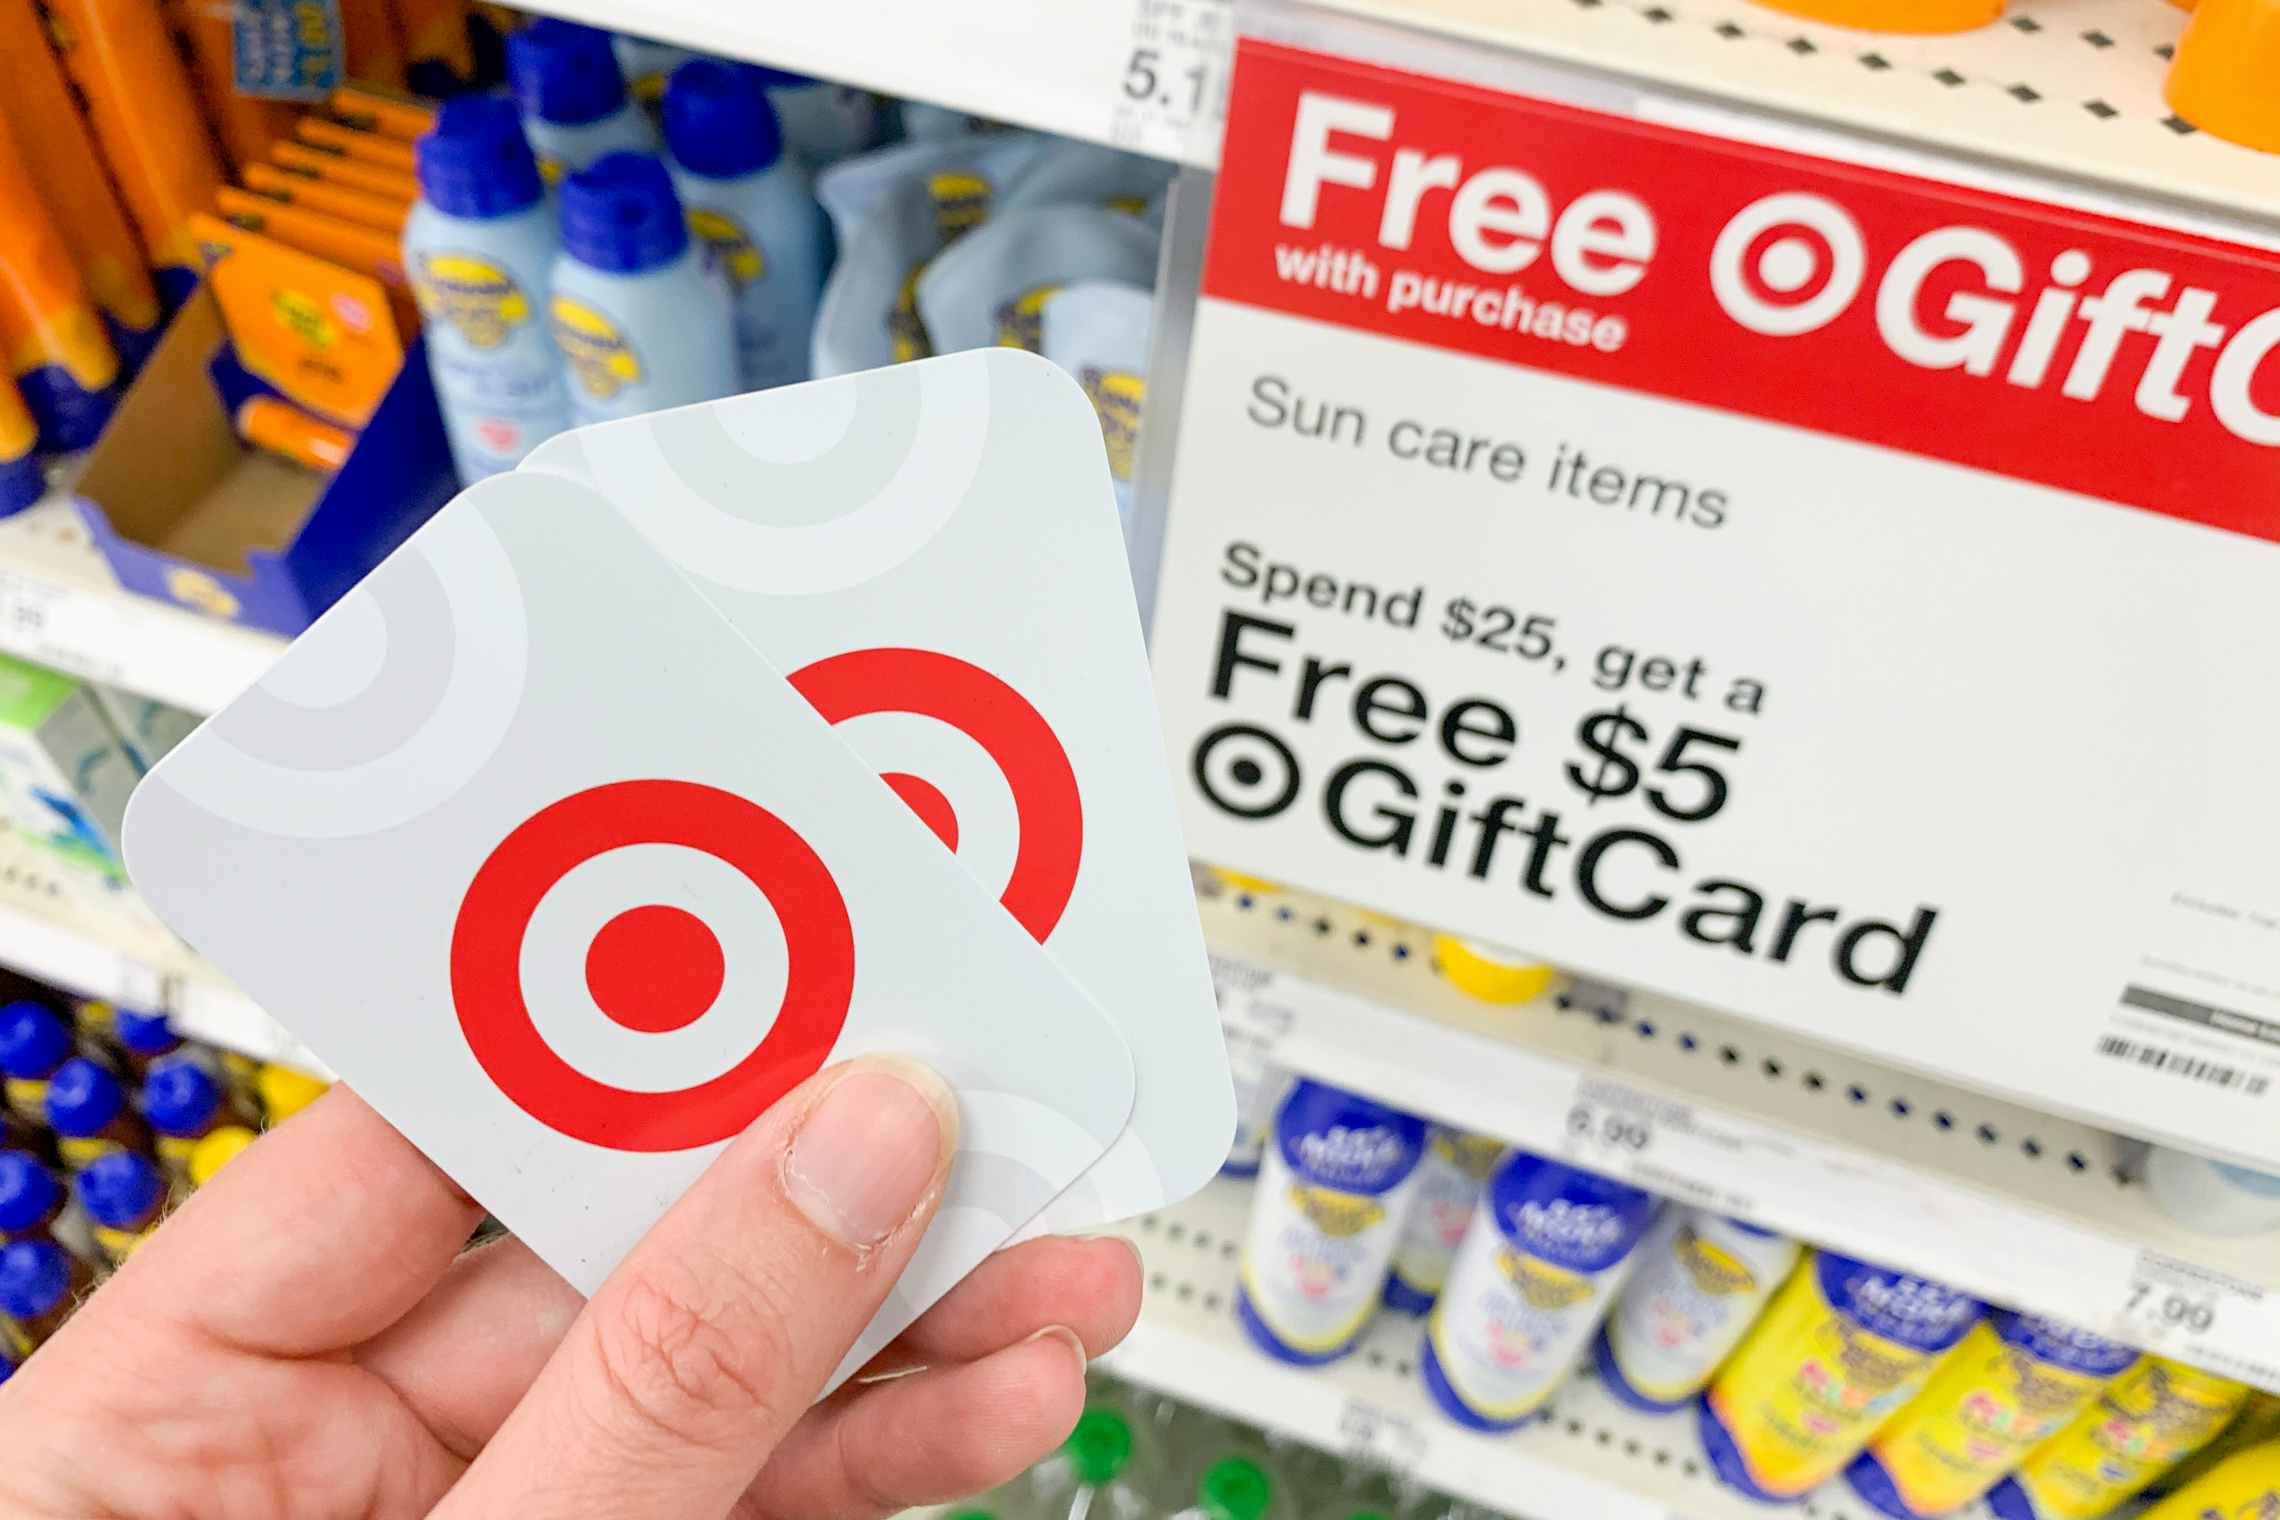 A person's hand holding two Target gift cards in front of a sign advertising getting a free Target gift card when you spend $25 on sun ca...